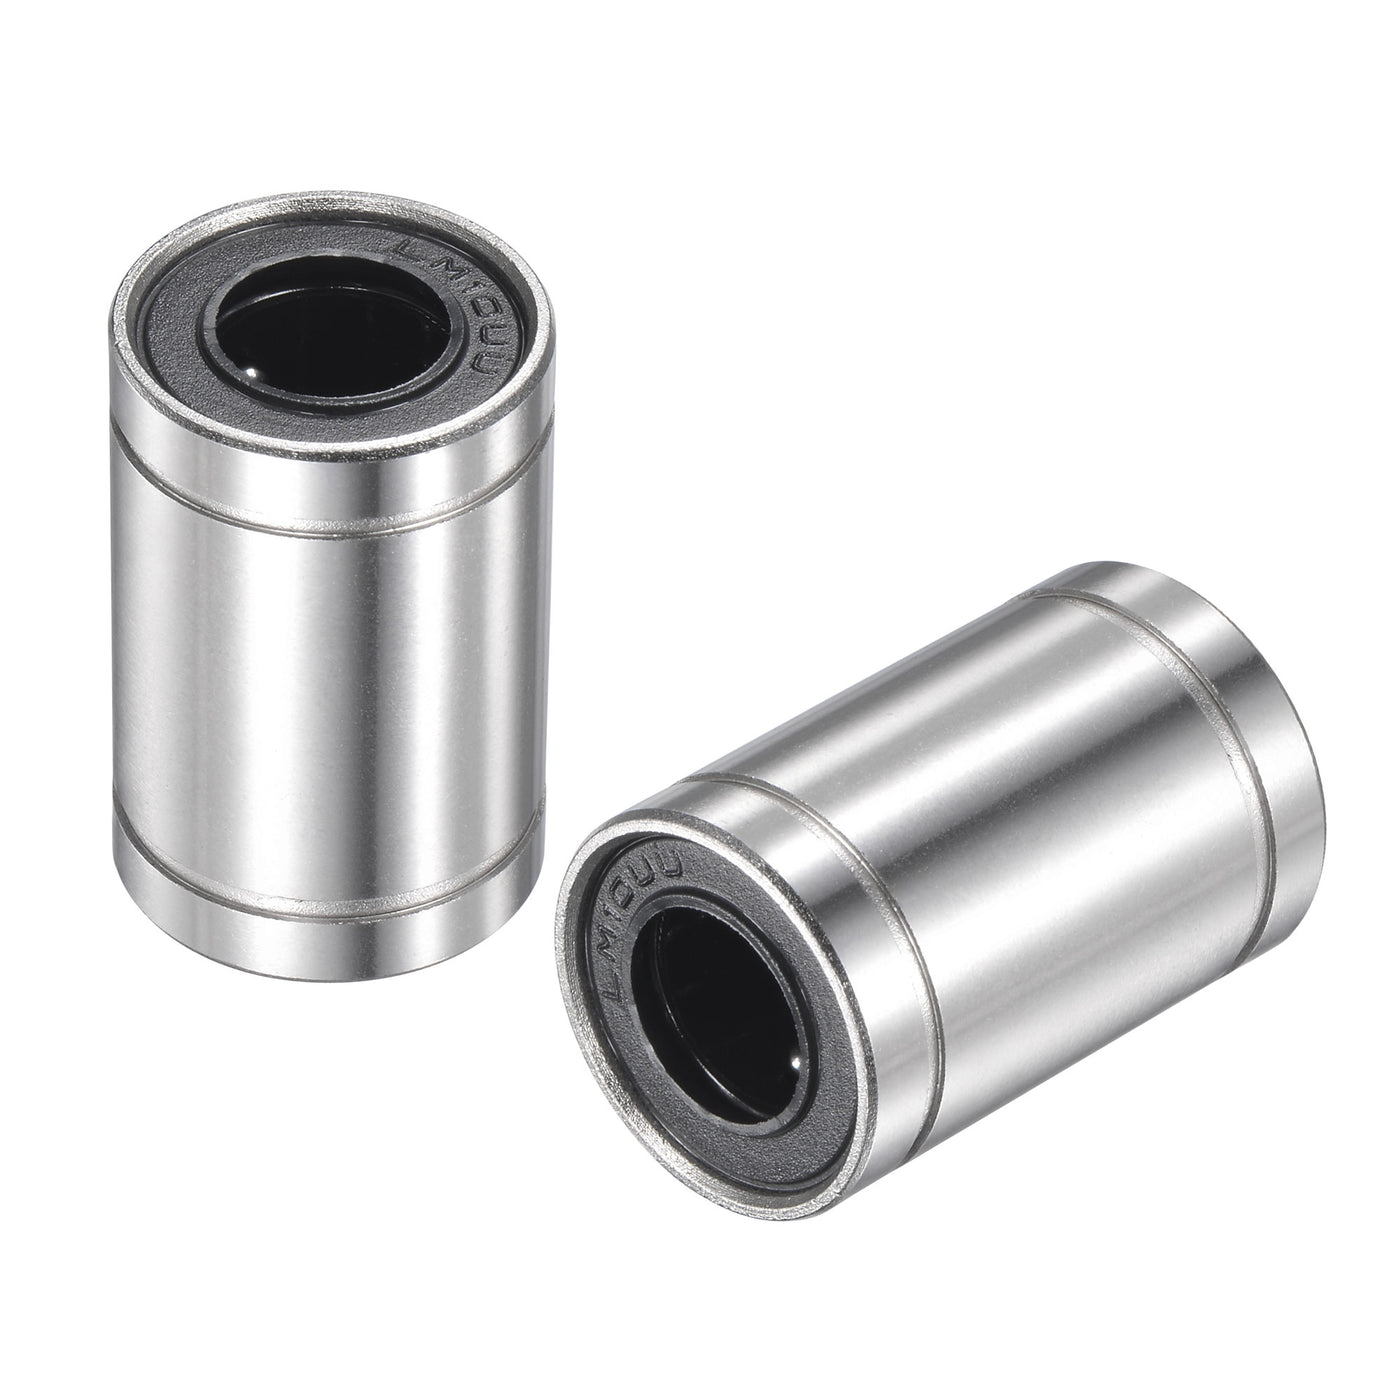 uxcell Uxcell Linear Ball Bearings Nickel Plated for CNC 3D Printer